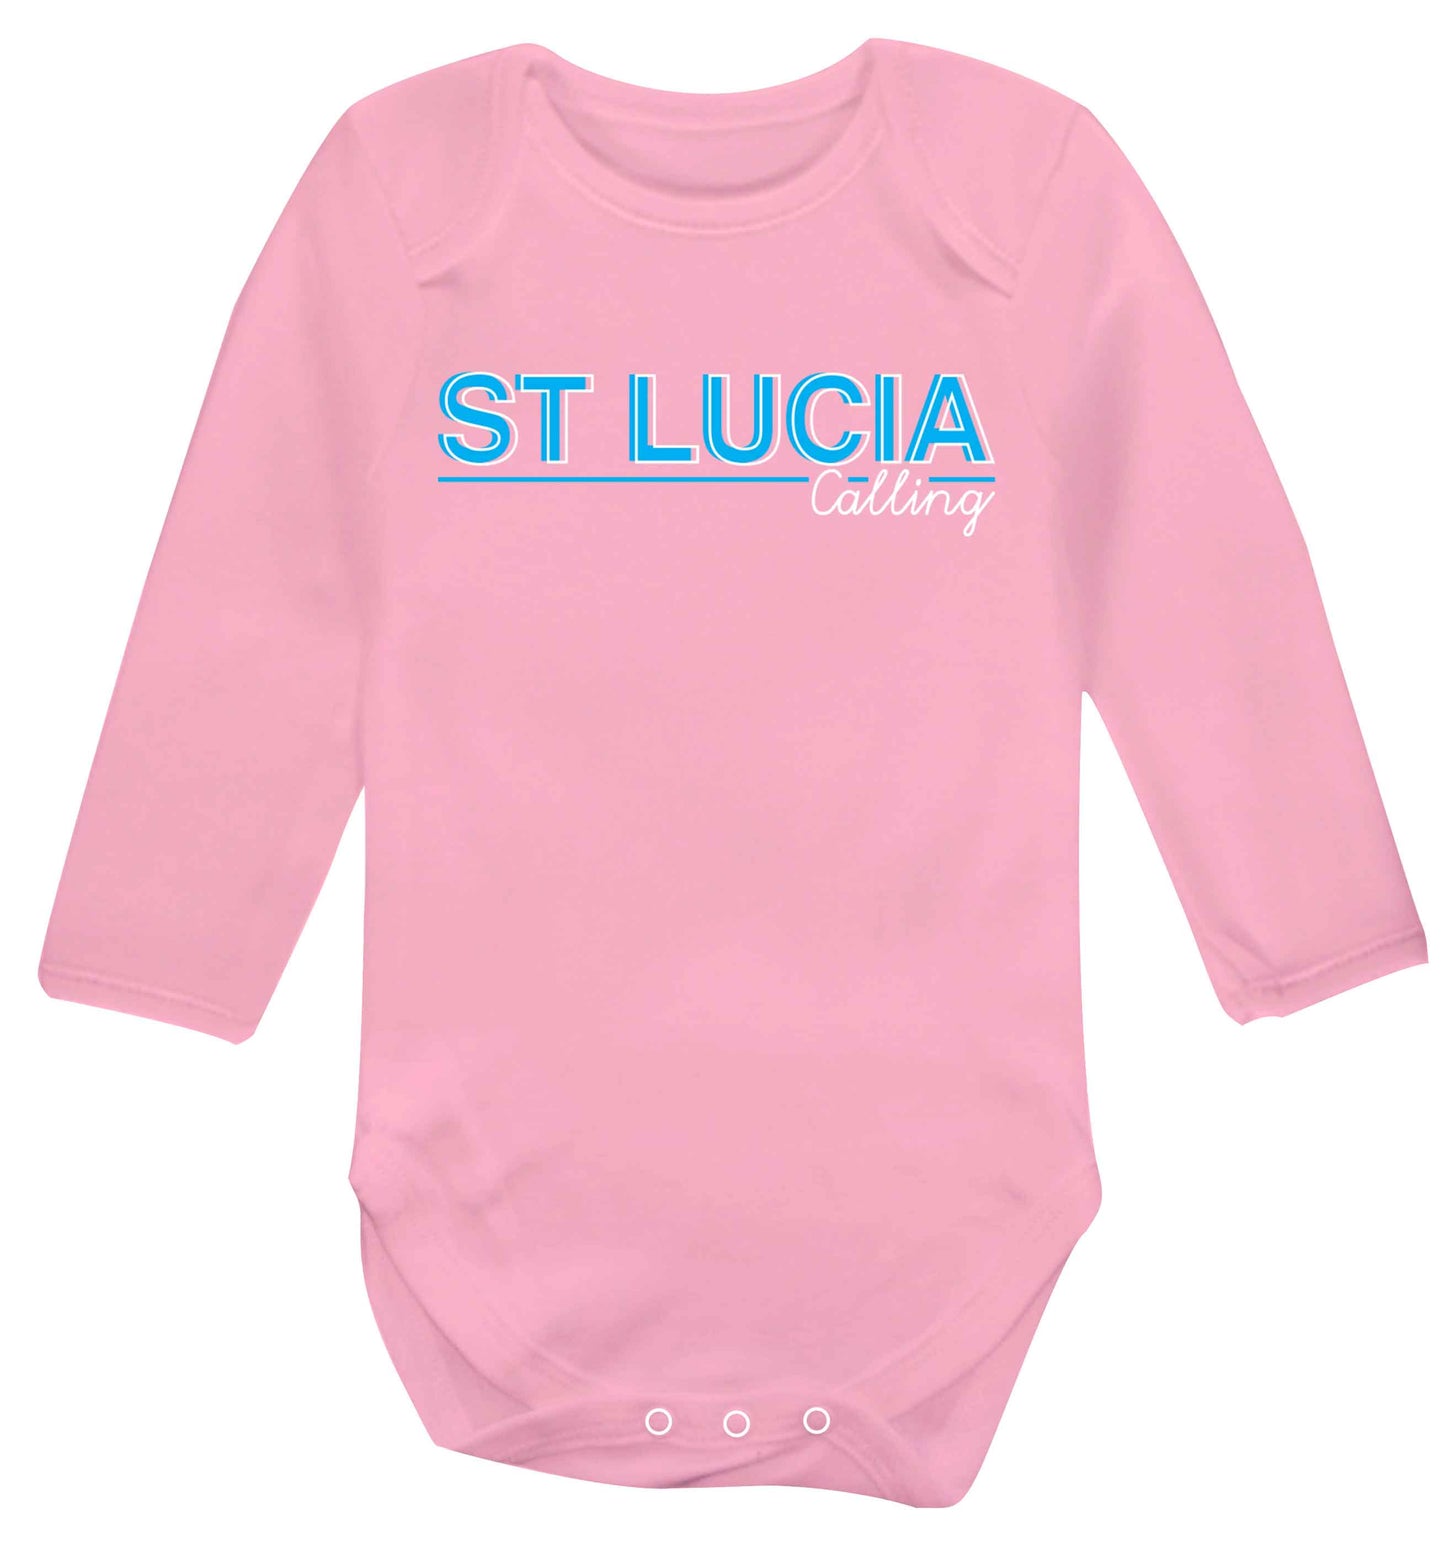 St Lucia calling Baby Vest long sleeved pale pink 6-12 months